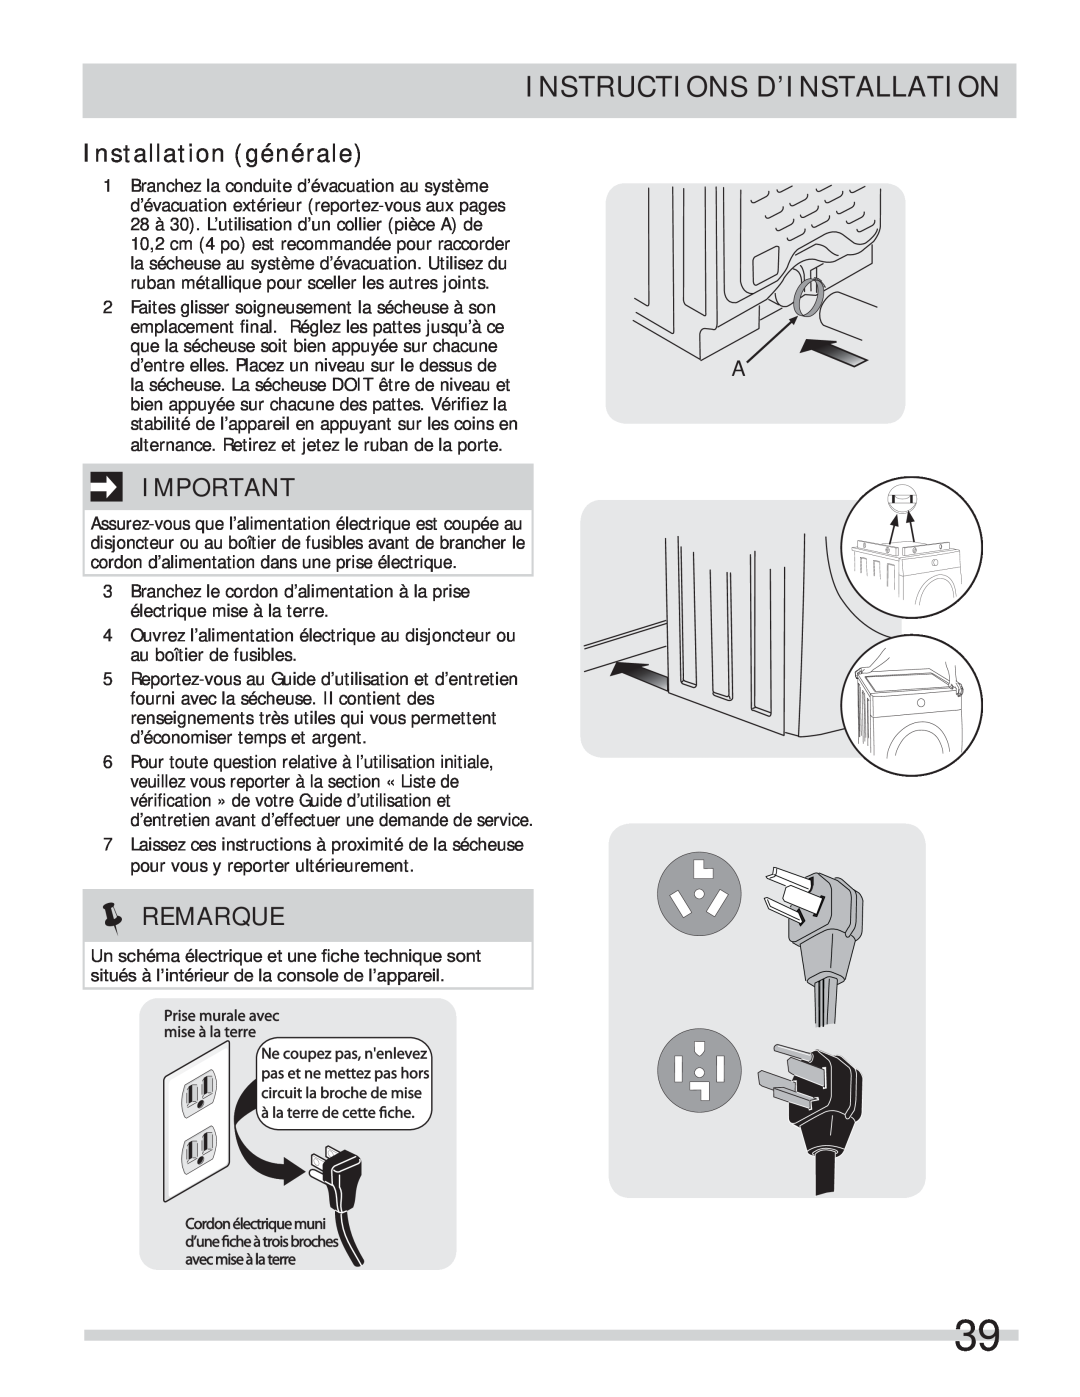 Frigidaire 137134900B important safety instructions Installation générale, Instructions D’Installation, Remarque 